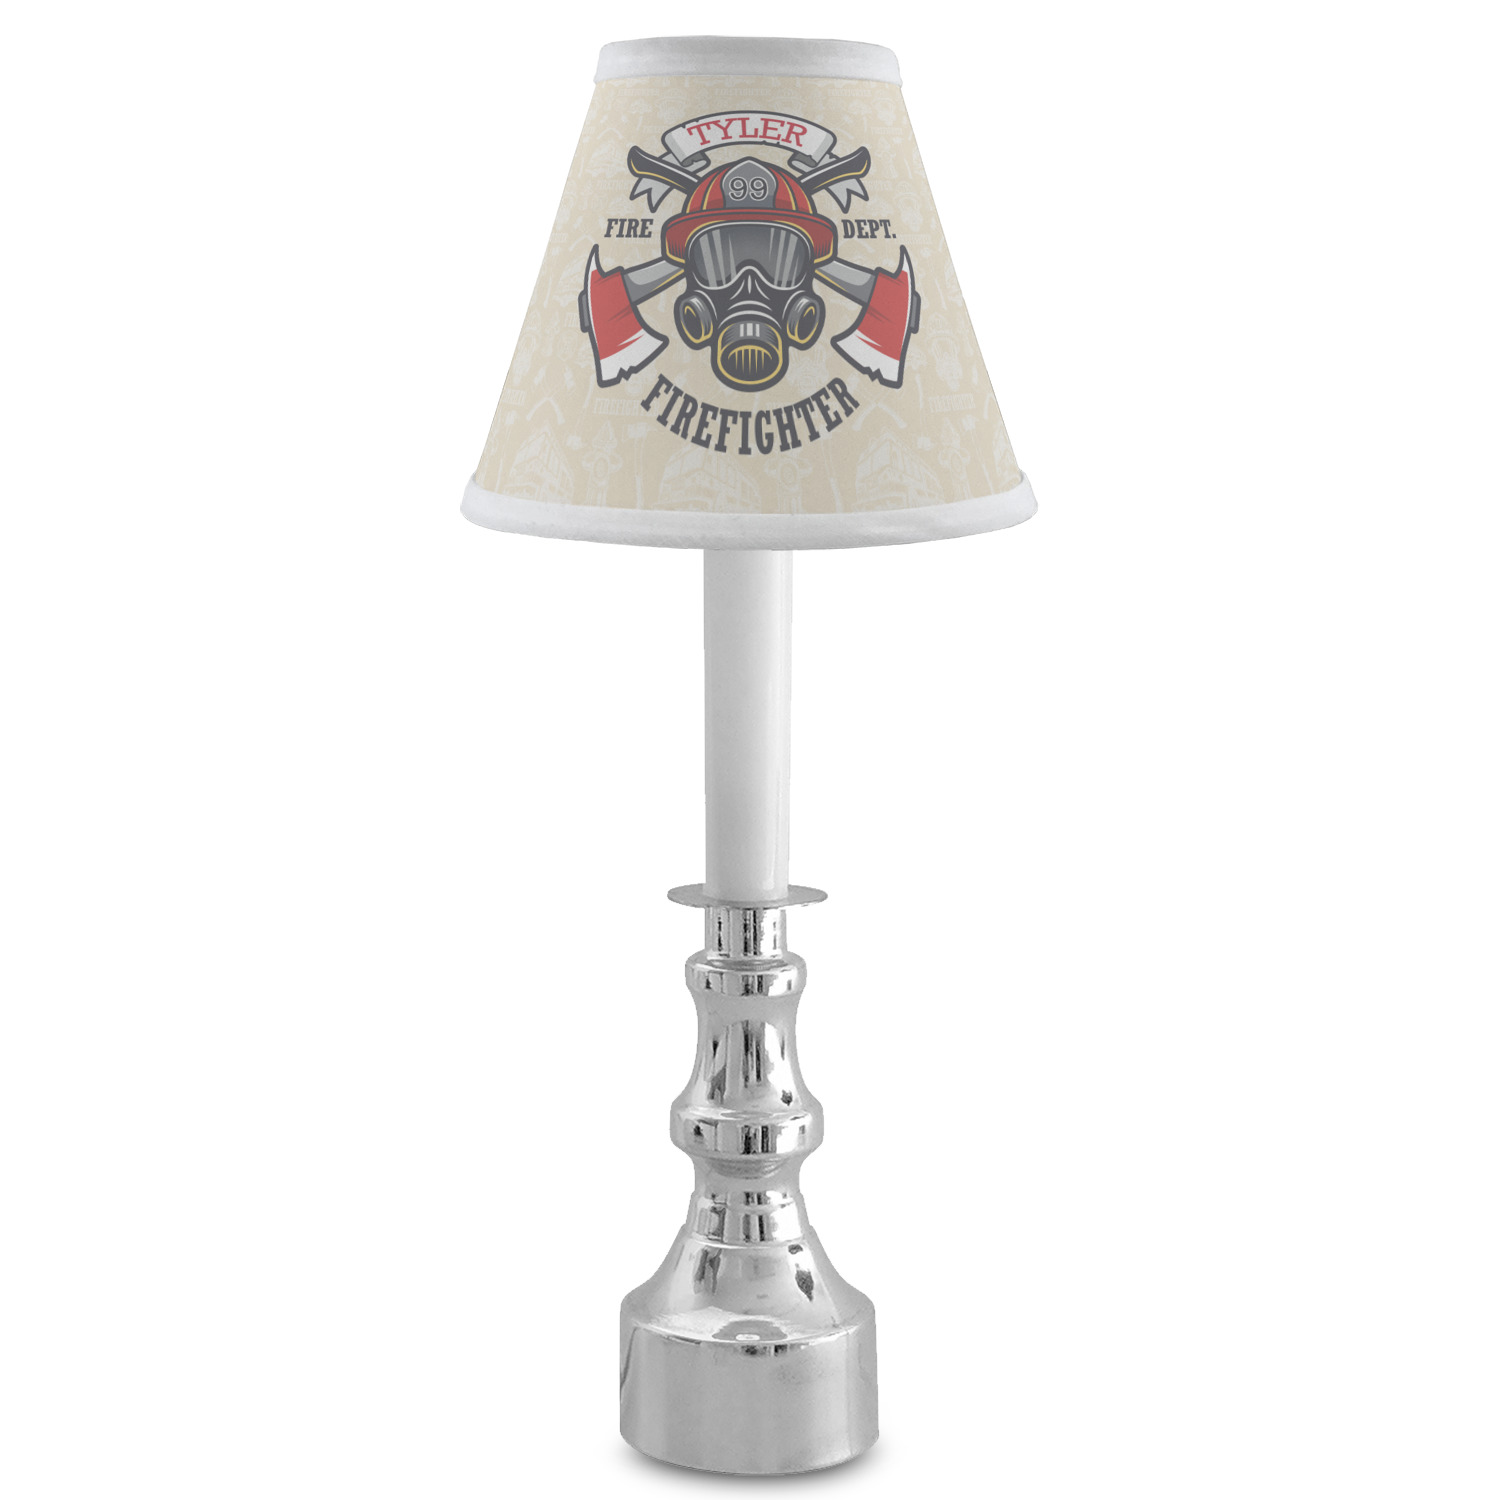 Firefighter Chandelier Lamp Shade, Firefighter Table Lamps